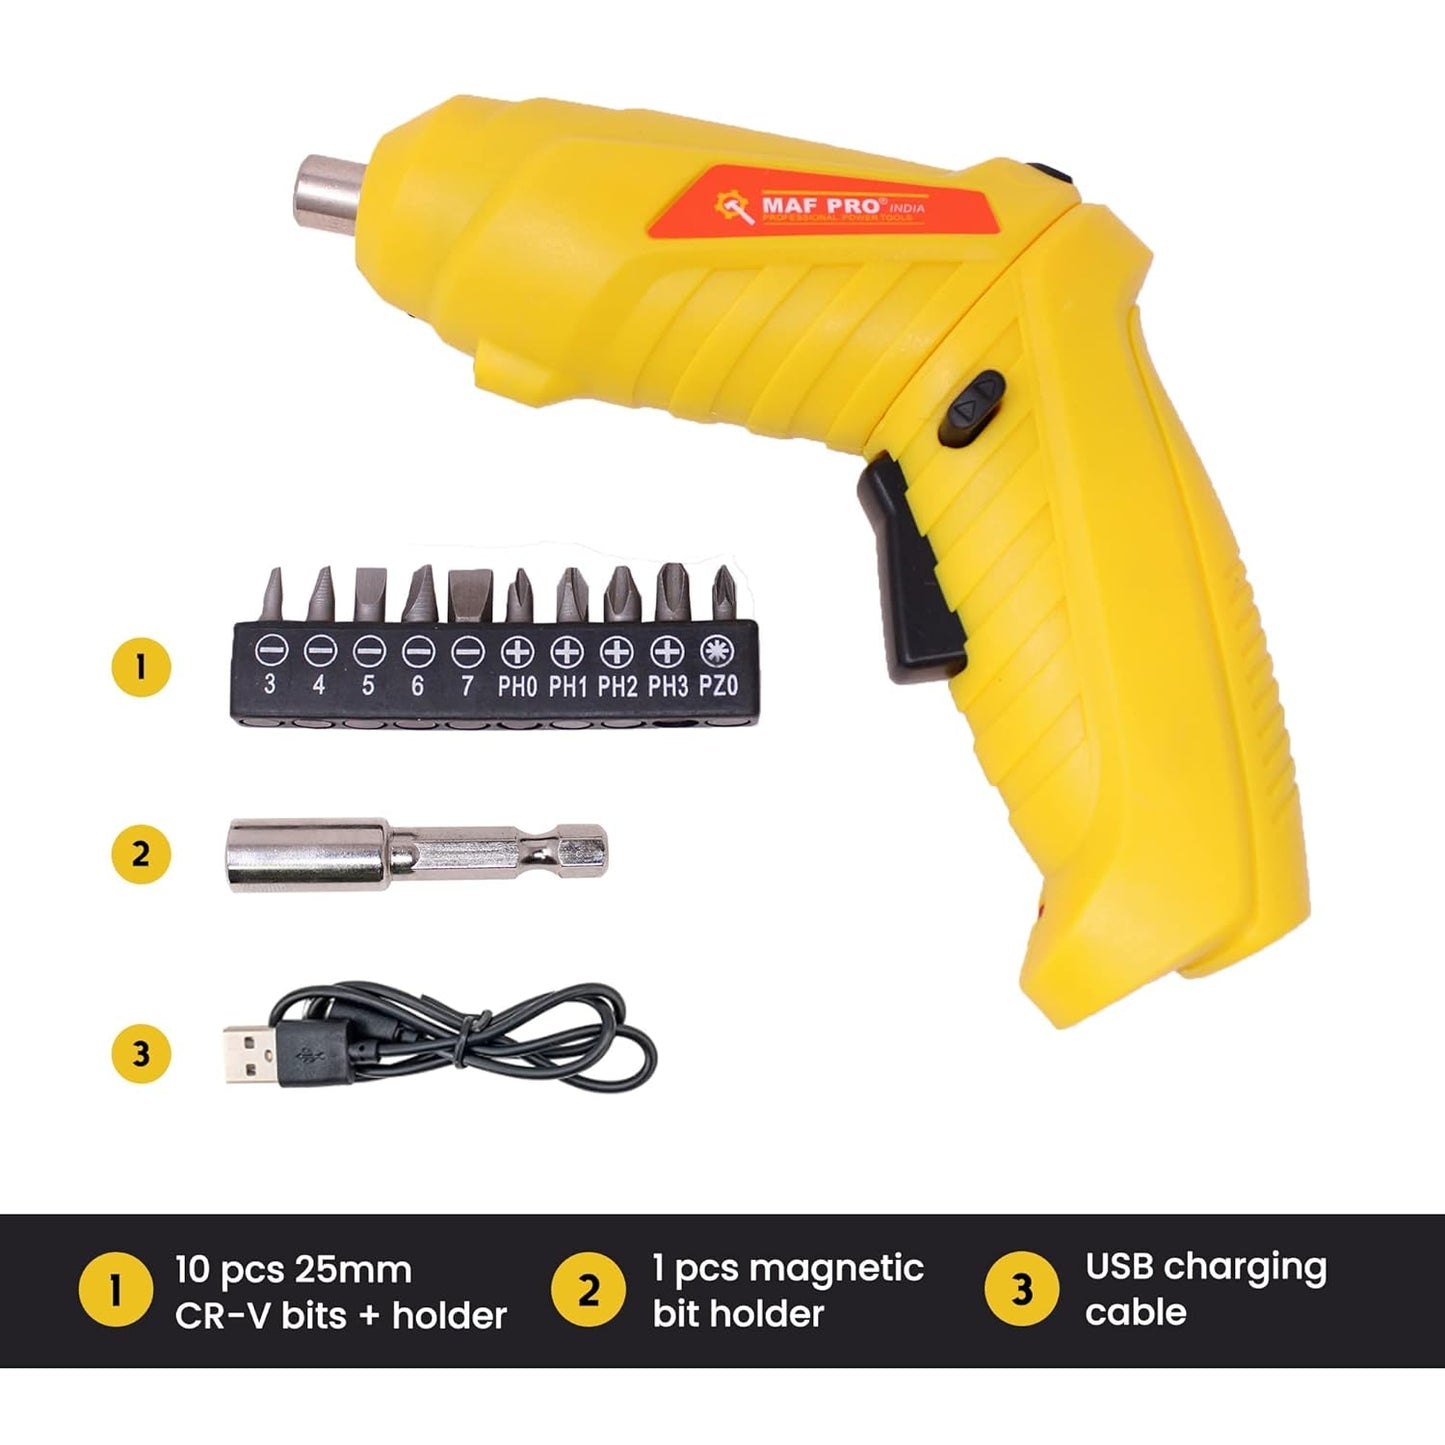 MAF PRO CDSLI0402 4V Cordless Screwdriver Kit with LED Light, Rechargeable, 90° Rotatable (11 Pieces, 6.35mm, Yellow)